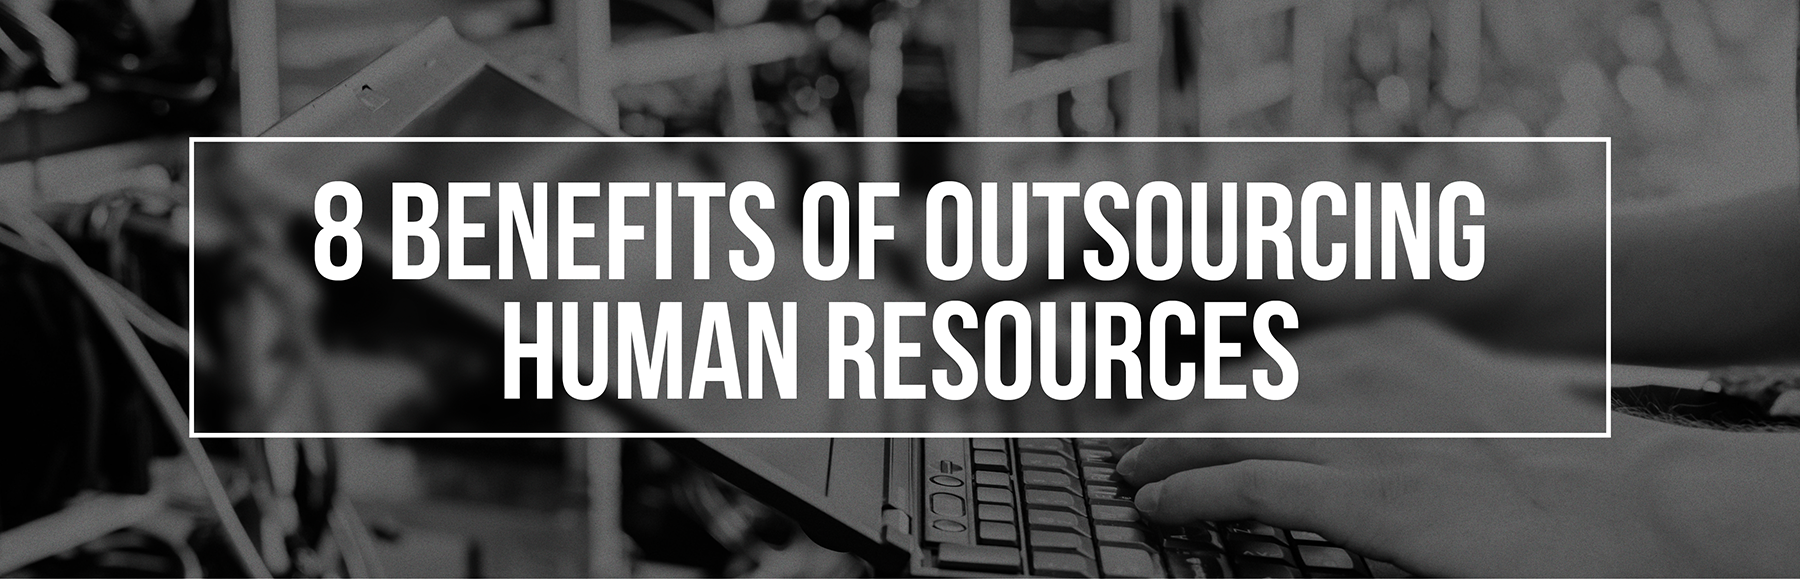 8-benefits-outsource-hr